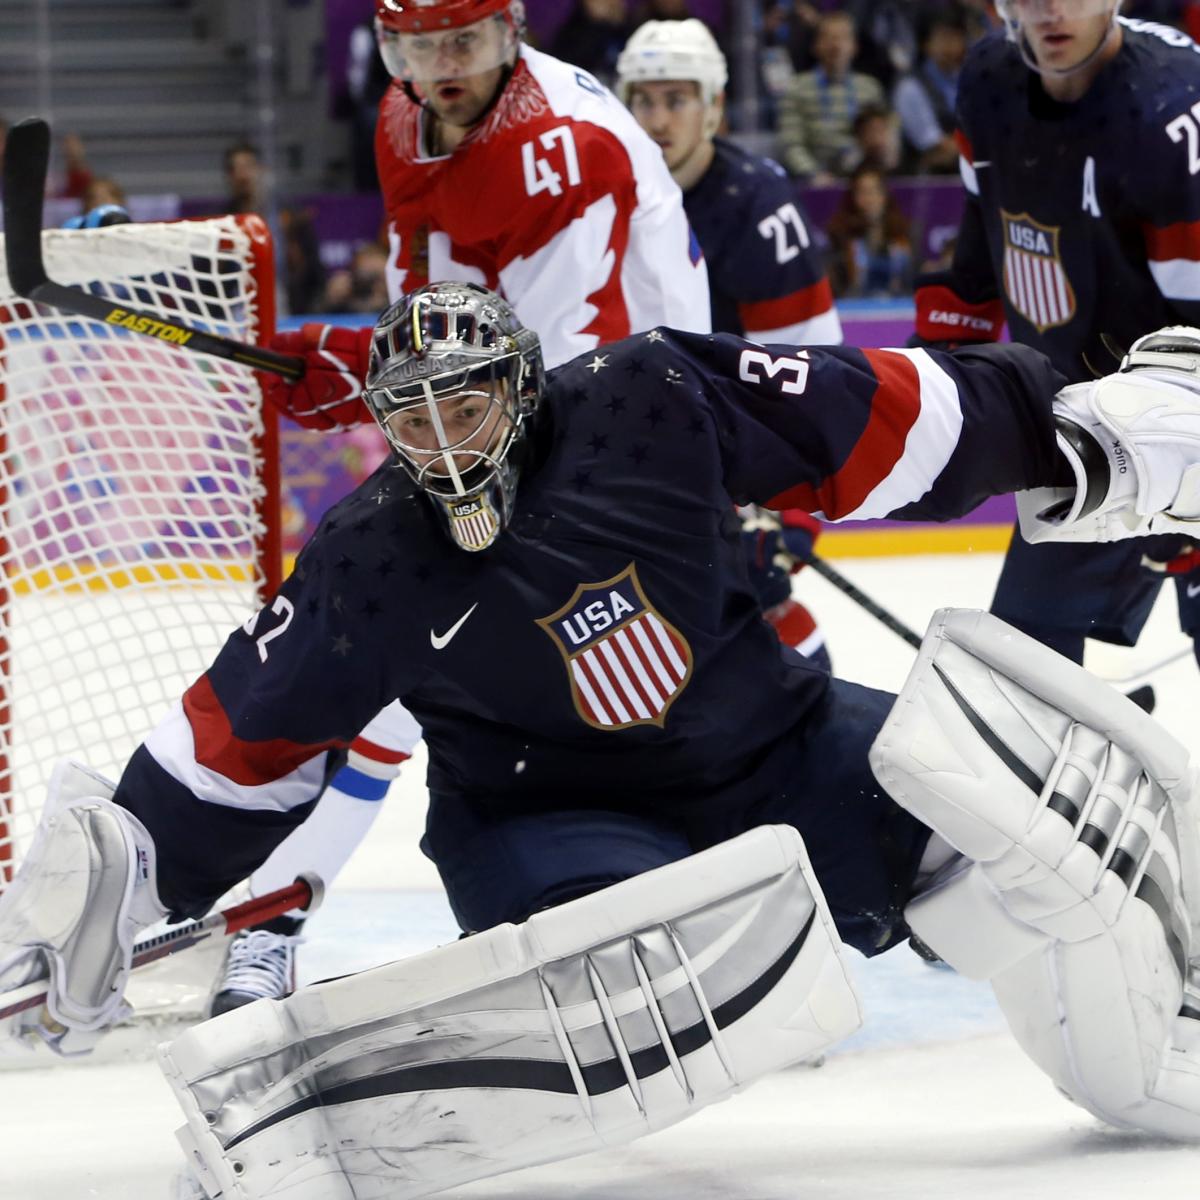 USA vs. Russia: Breaking Down What This Game Means for Both Teams